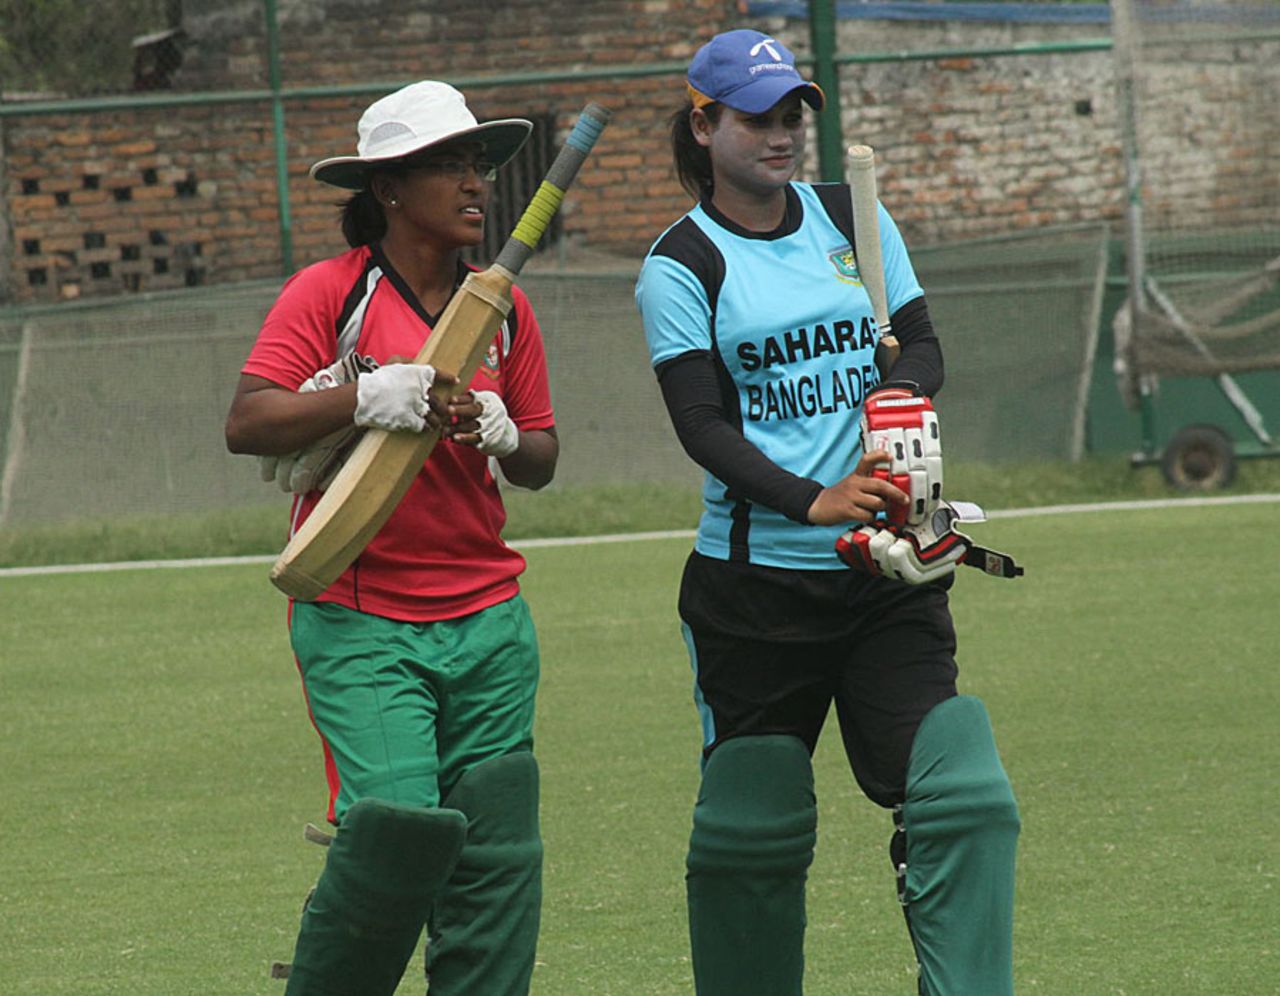 Bangladesh players at practice, Mirpur, March 30, 2013